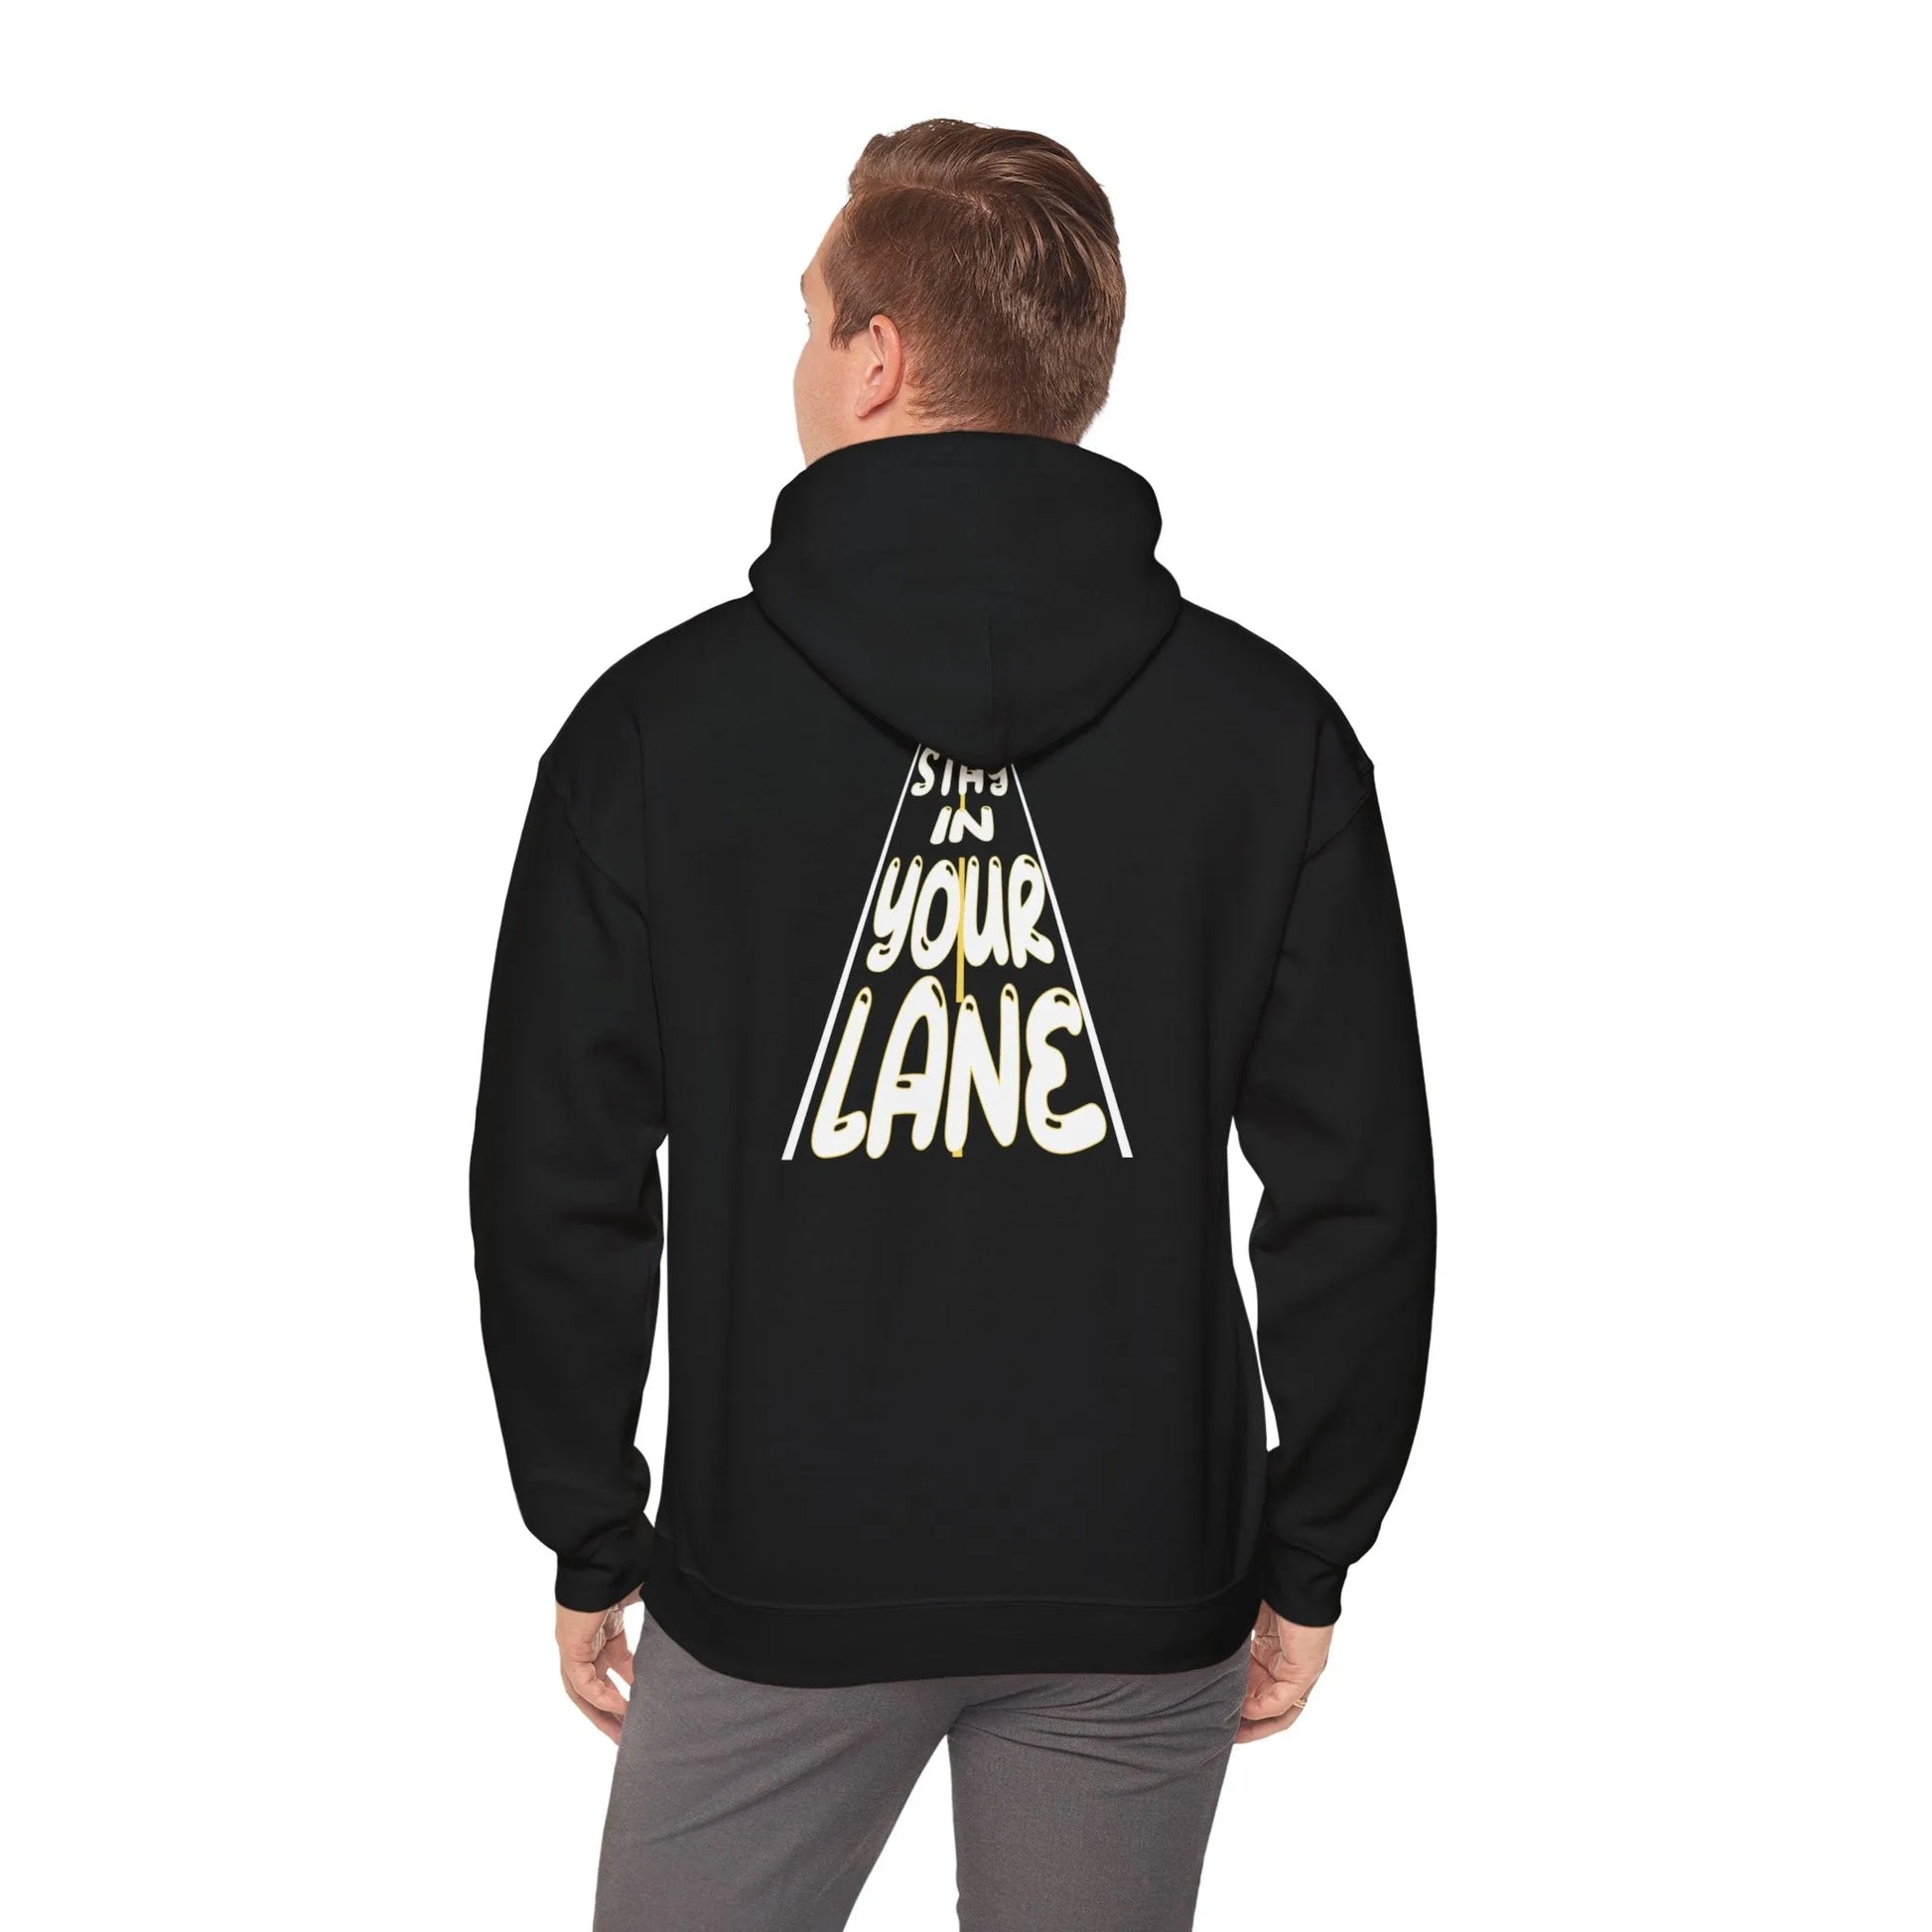 My Journey My Way: Stay In Your Lane Hooded Sweatshirt - Stay In Your Lane Sweatshirt - Trendy  Graphic Hoodie Back View Model